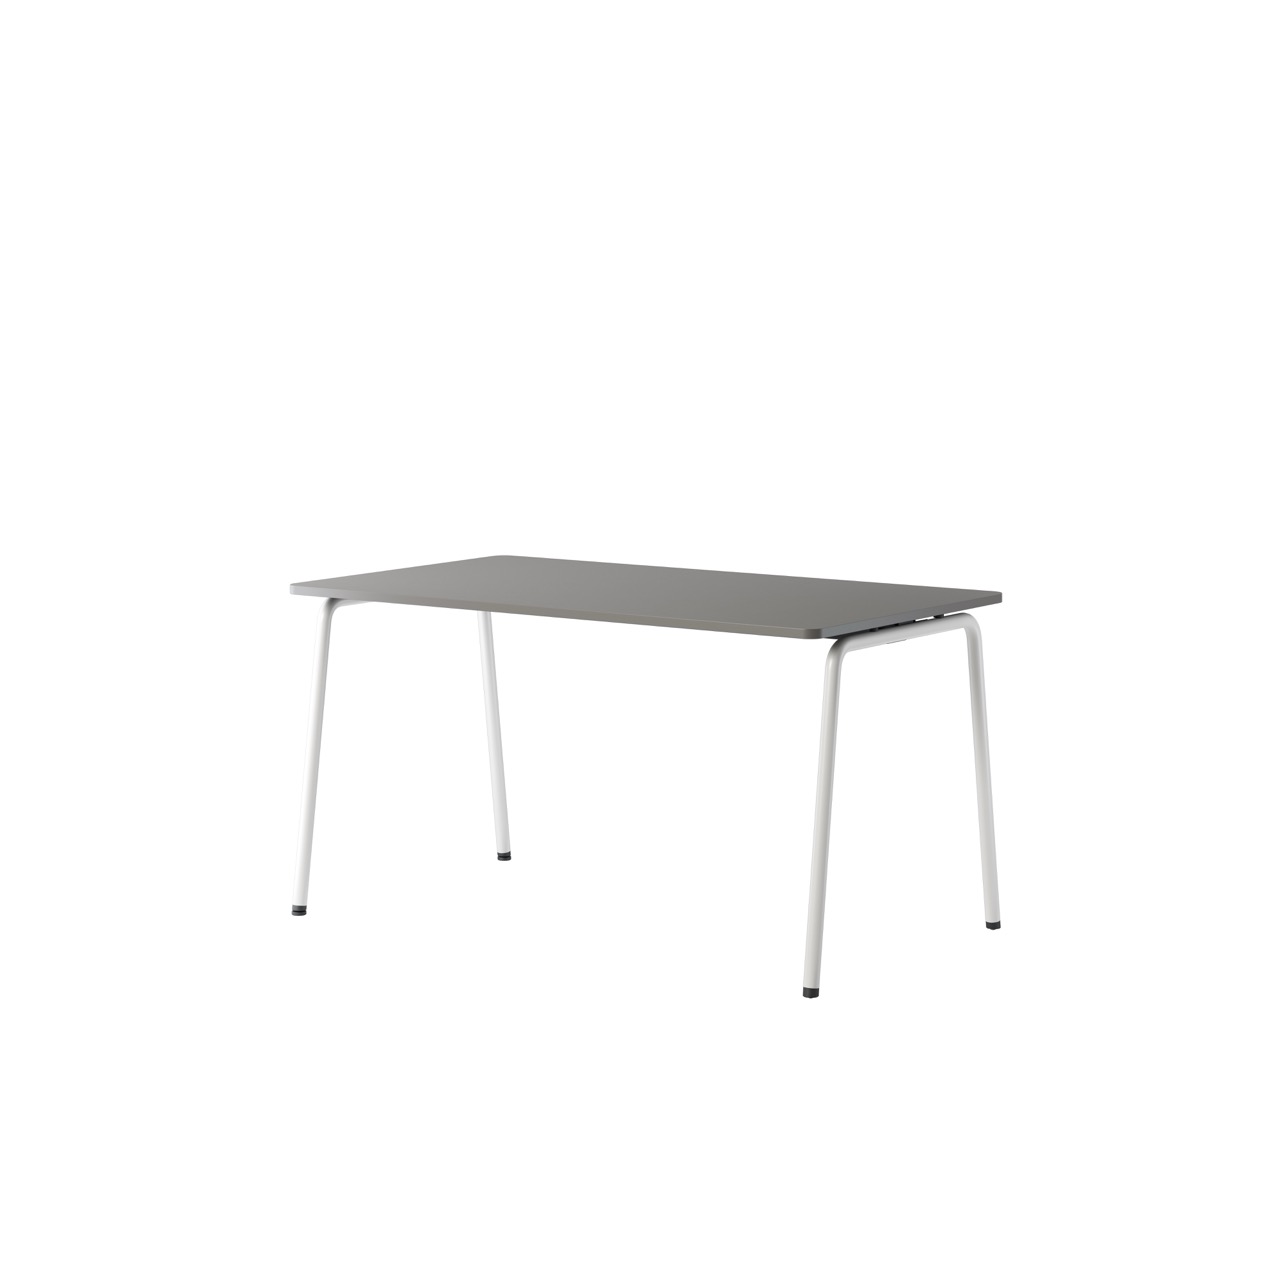 OCEE&FOUR - Tables - FourReal 74 - 140 x 80 - Angled - Packshot Image 8 Large